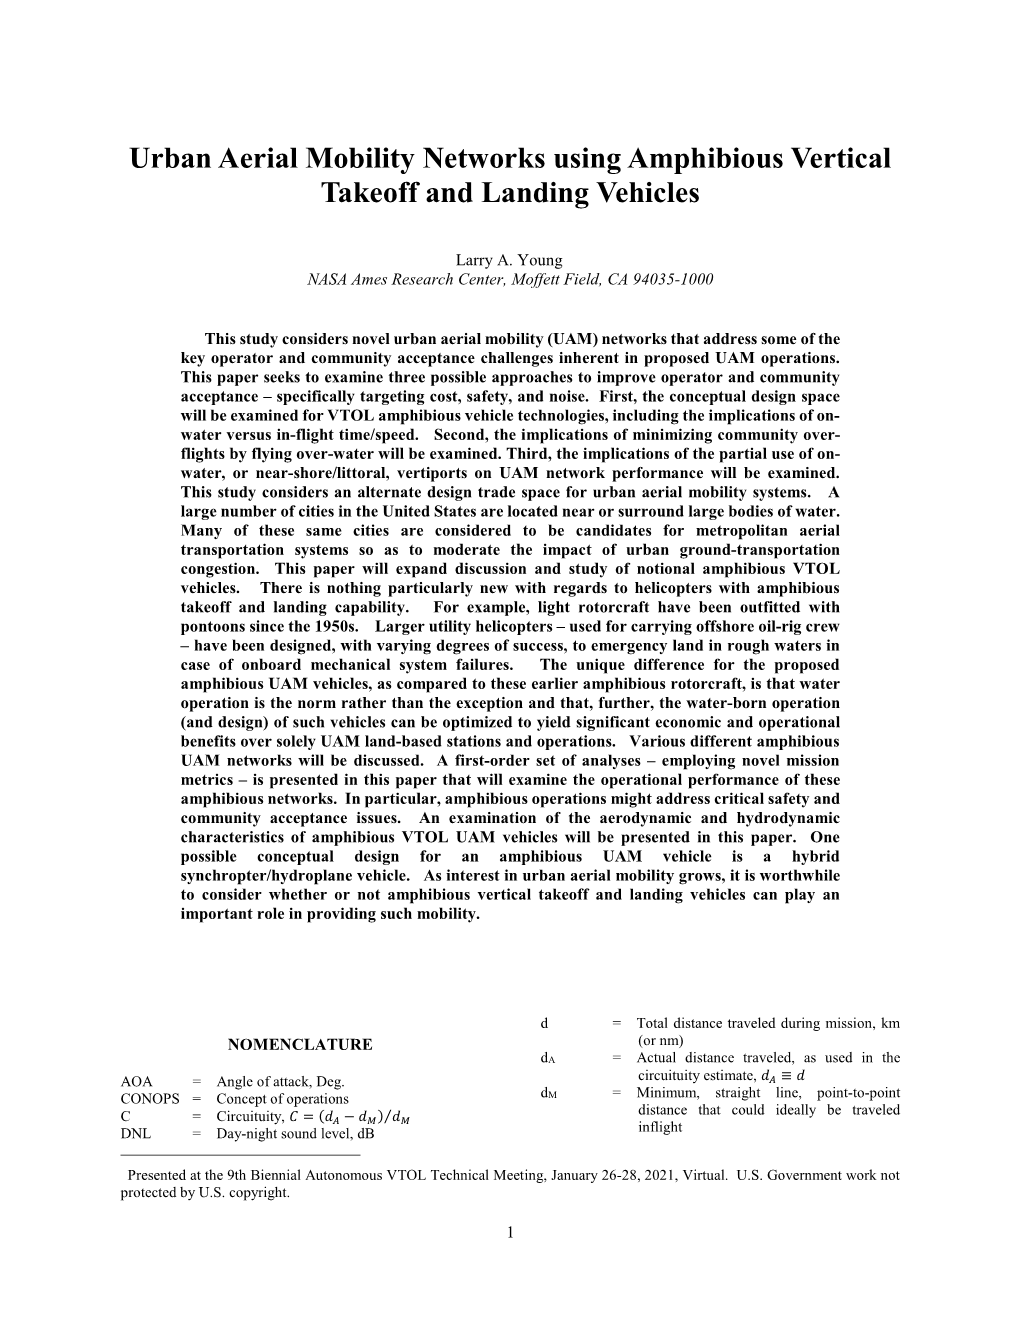 Urban Aerial Mobility Networks Using Amphibious Vertical Takeoff and Landing Vehicles